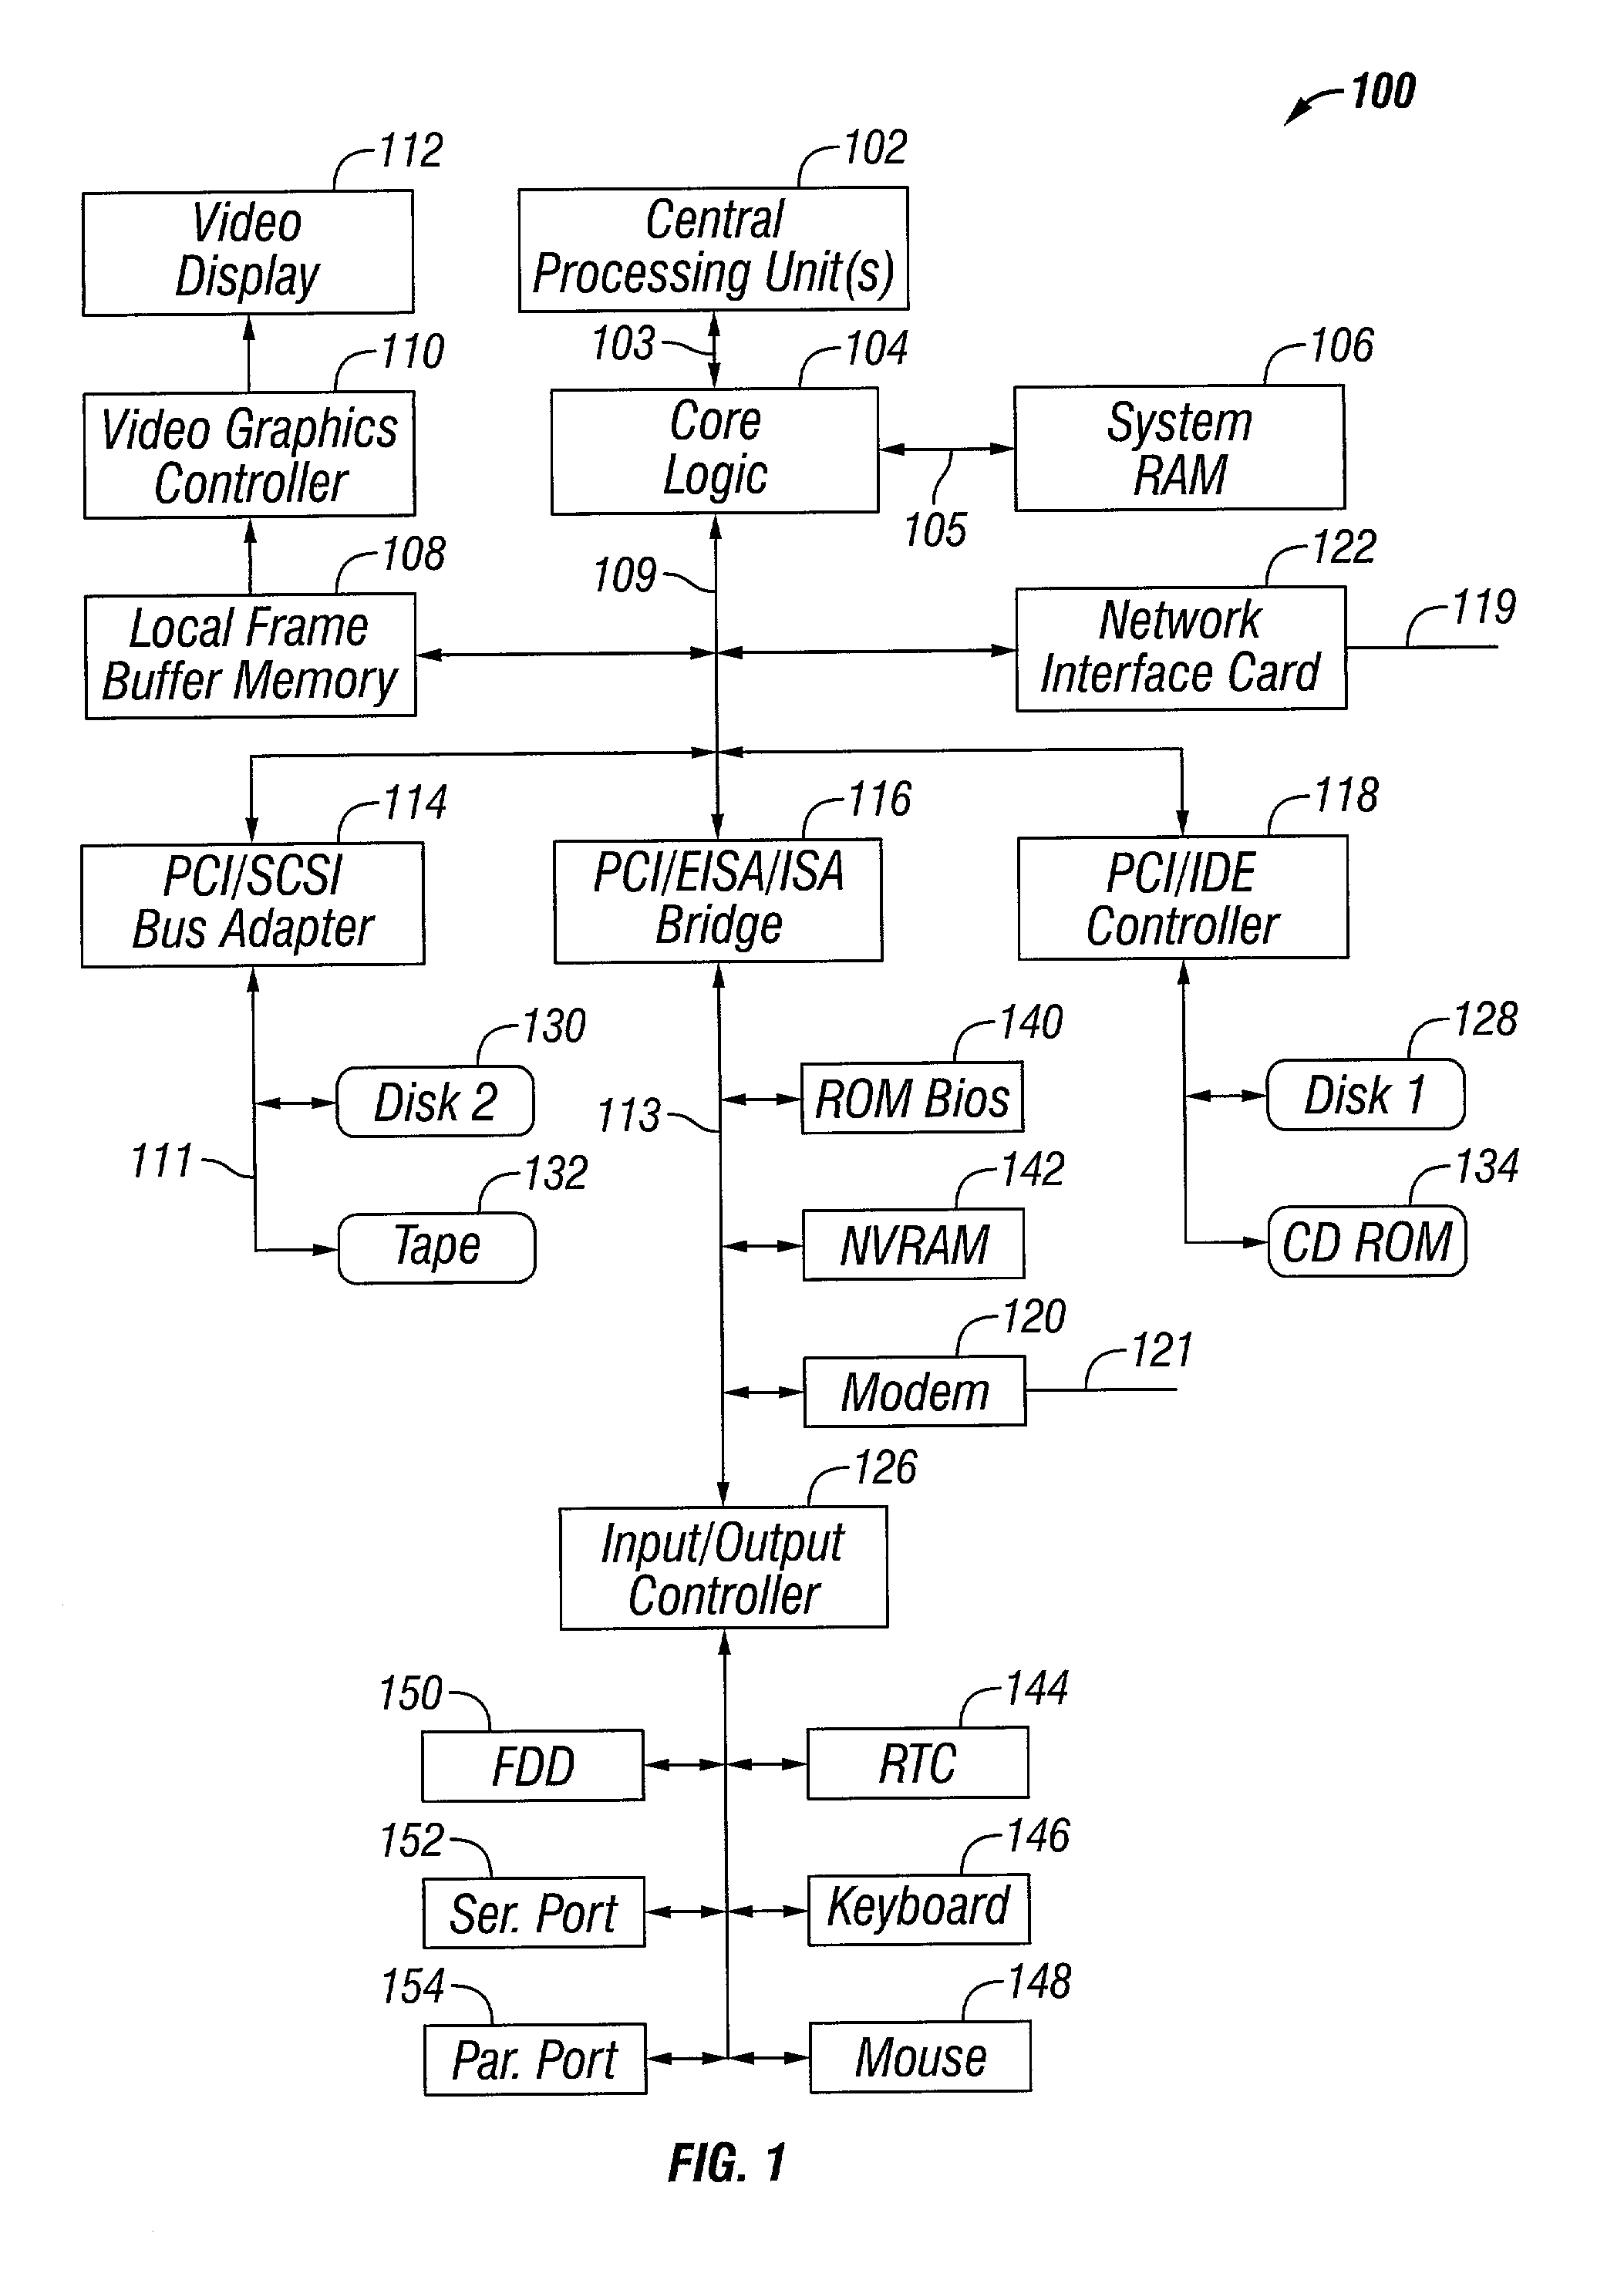 Distributed peer-to-peer communication for interconnect busses of a computer system